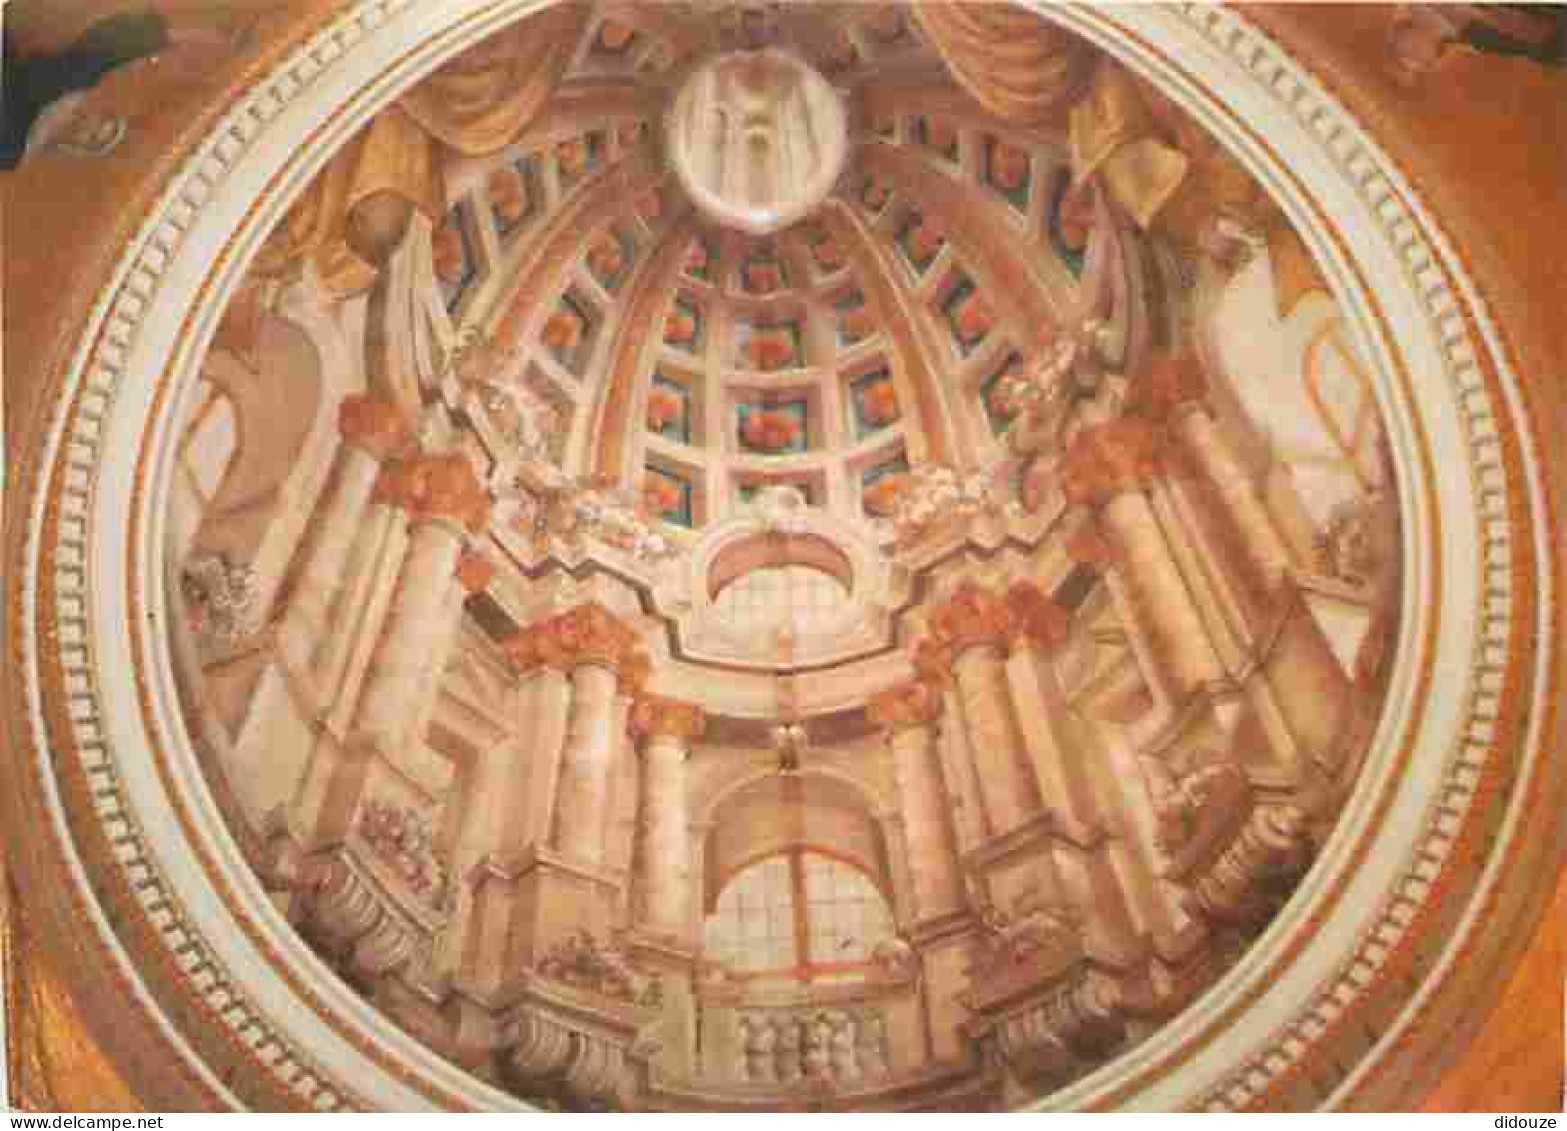 Malte - Gozo - The Cathedral Victoria - Trompe L'Oeil Painting Of Cupola - CPM - Voir Scans Recto-Verso - Malta